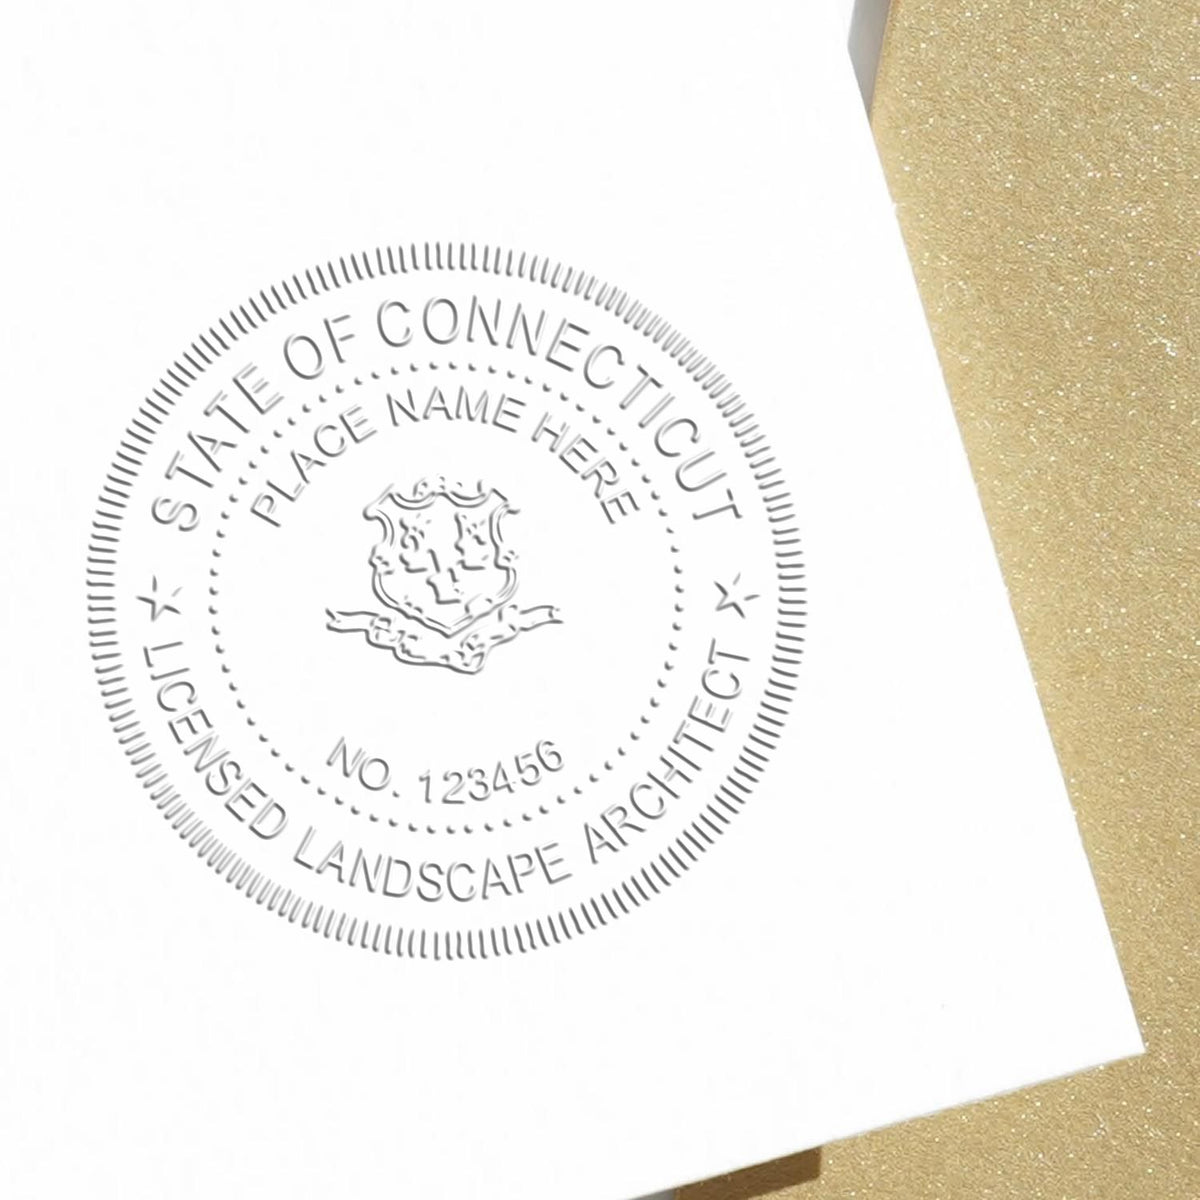 An in use photo of the Hybrid Connecticut Landscape Architect Seal showing a sample imprint on a cardstock